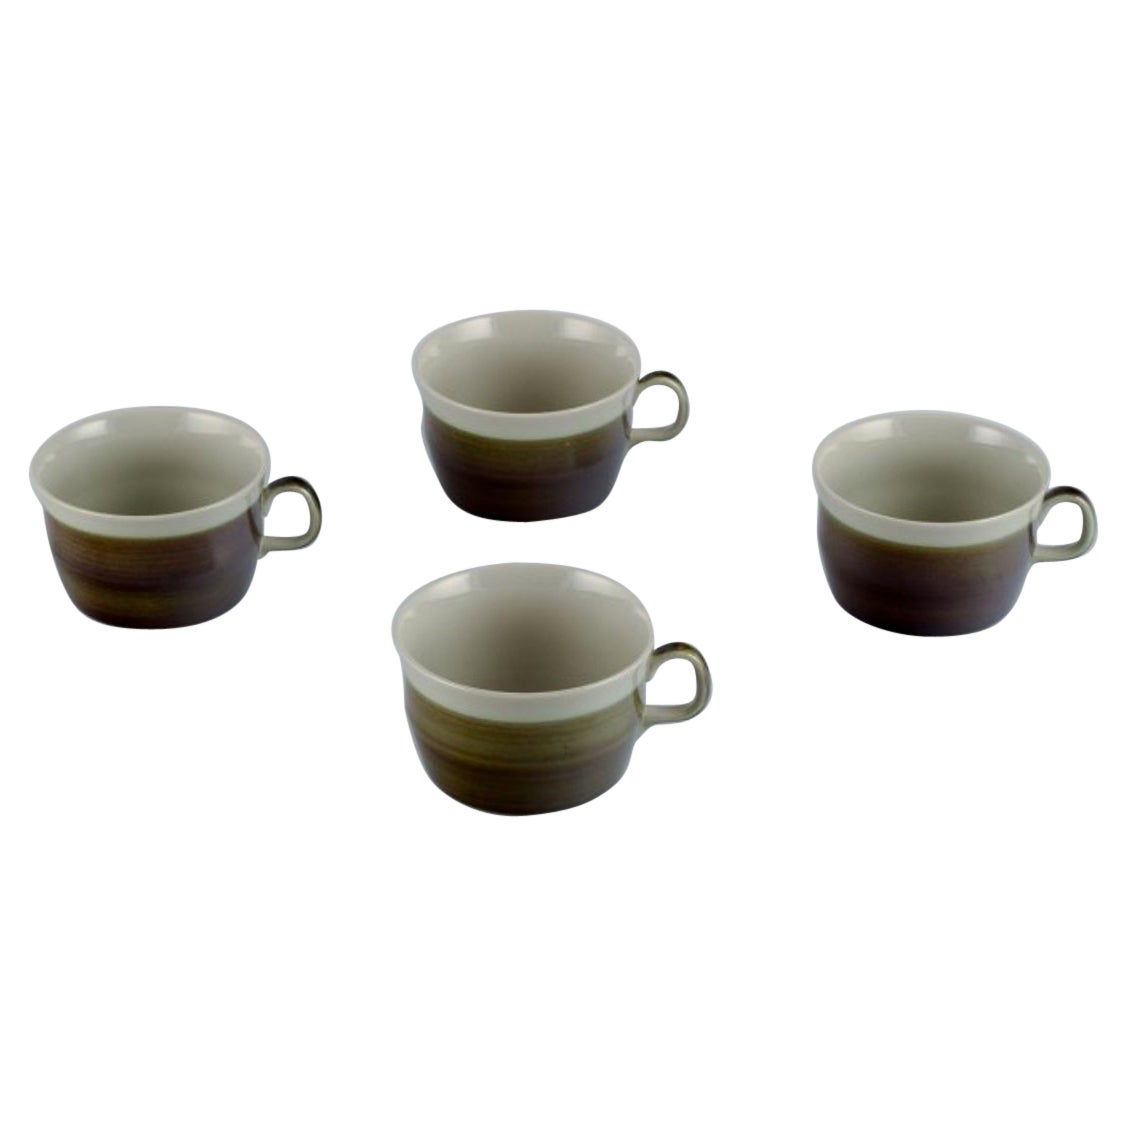 Marianne Westman for Rörstrand, "Maya" set of four coffee cups in stoneware For Sale